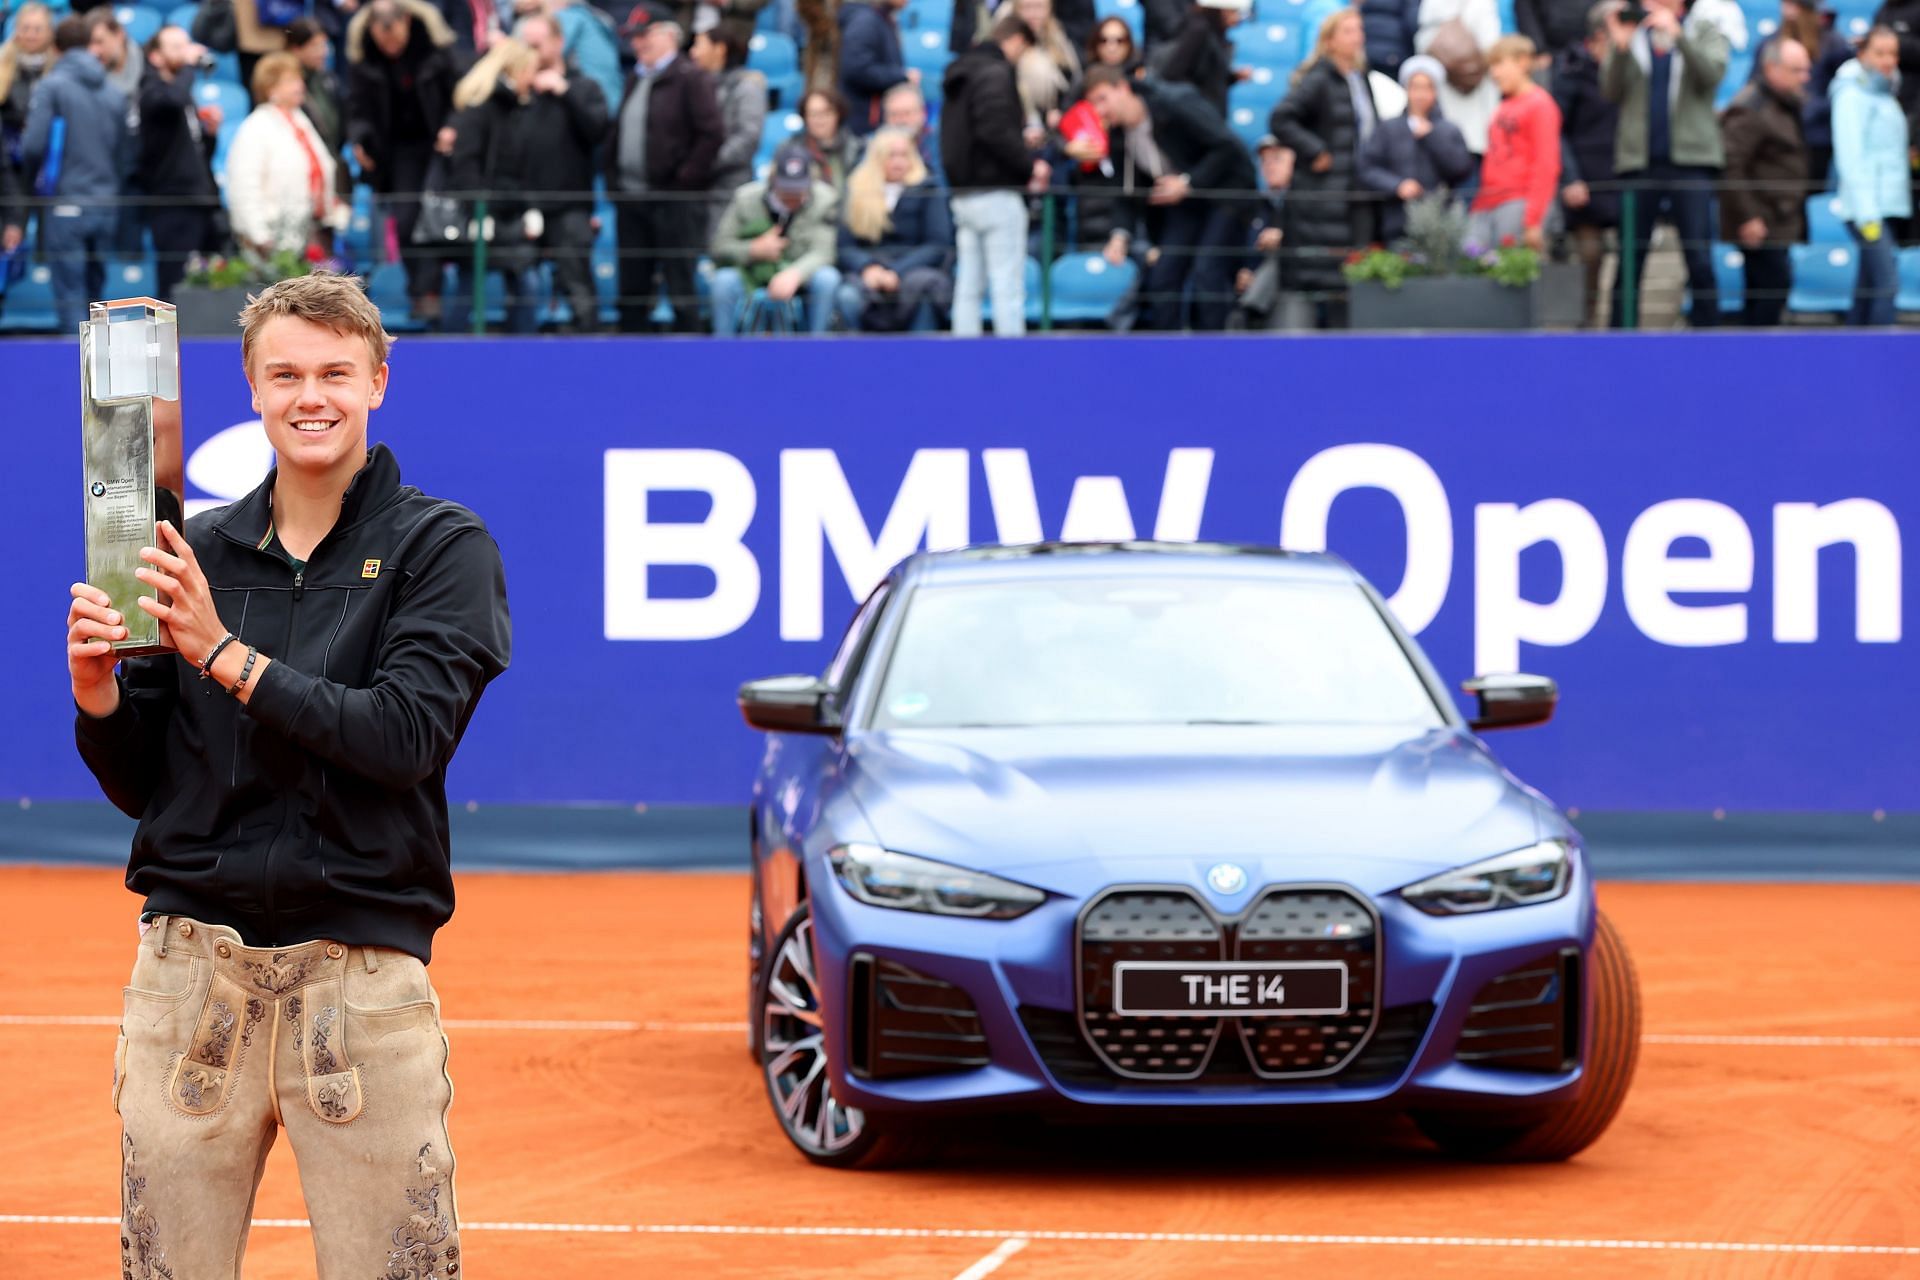 Holger Rune at the 2022 BMW Open.